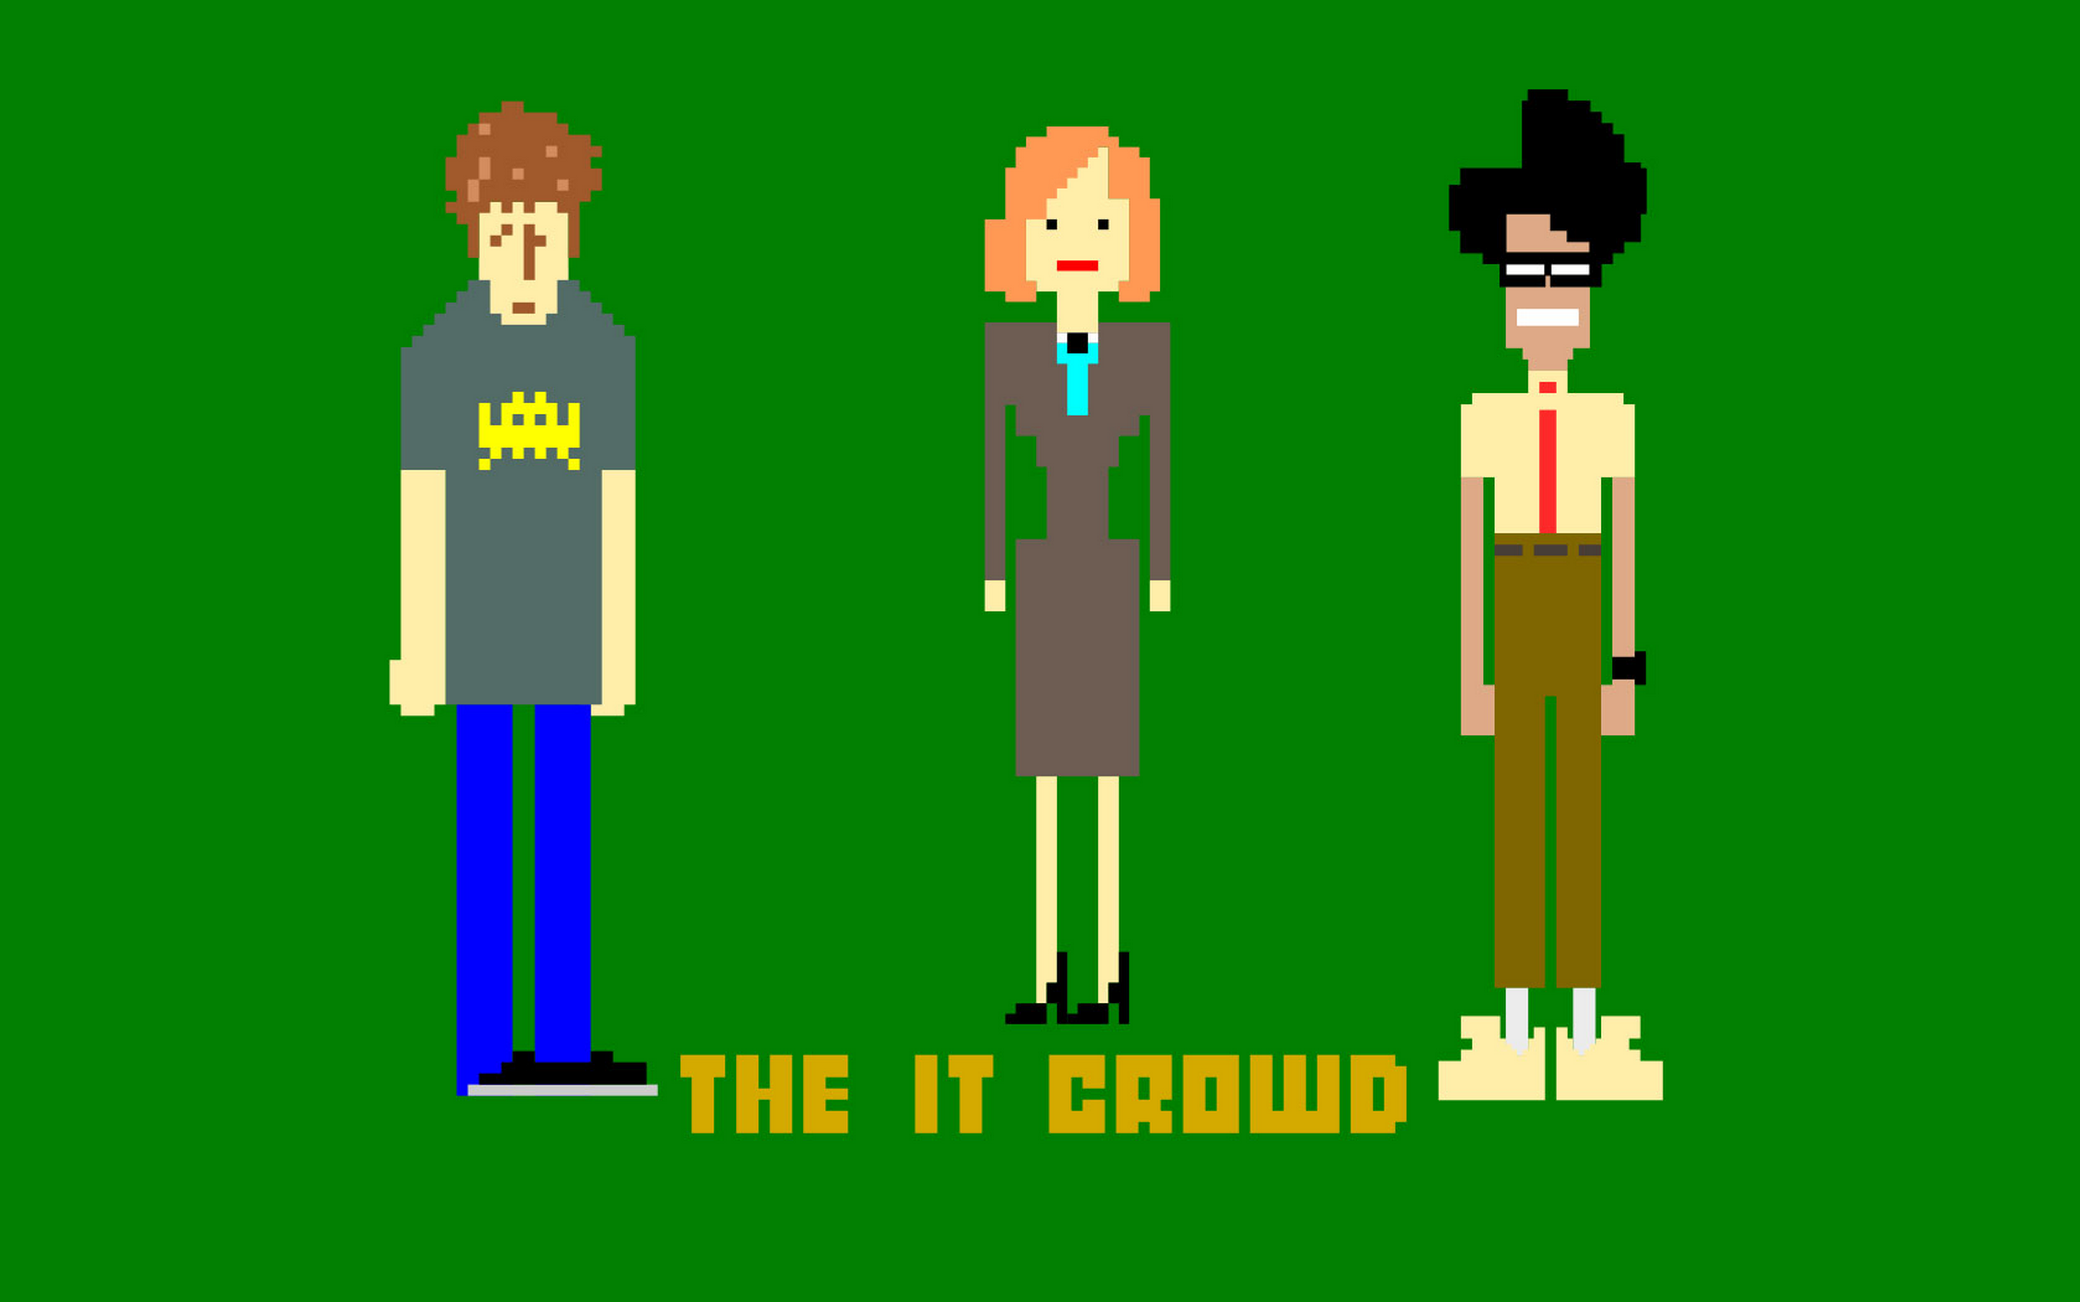 Nbc having another go at bringing ‘the it crowd’ to the us